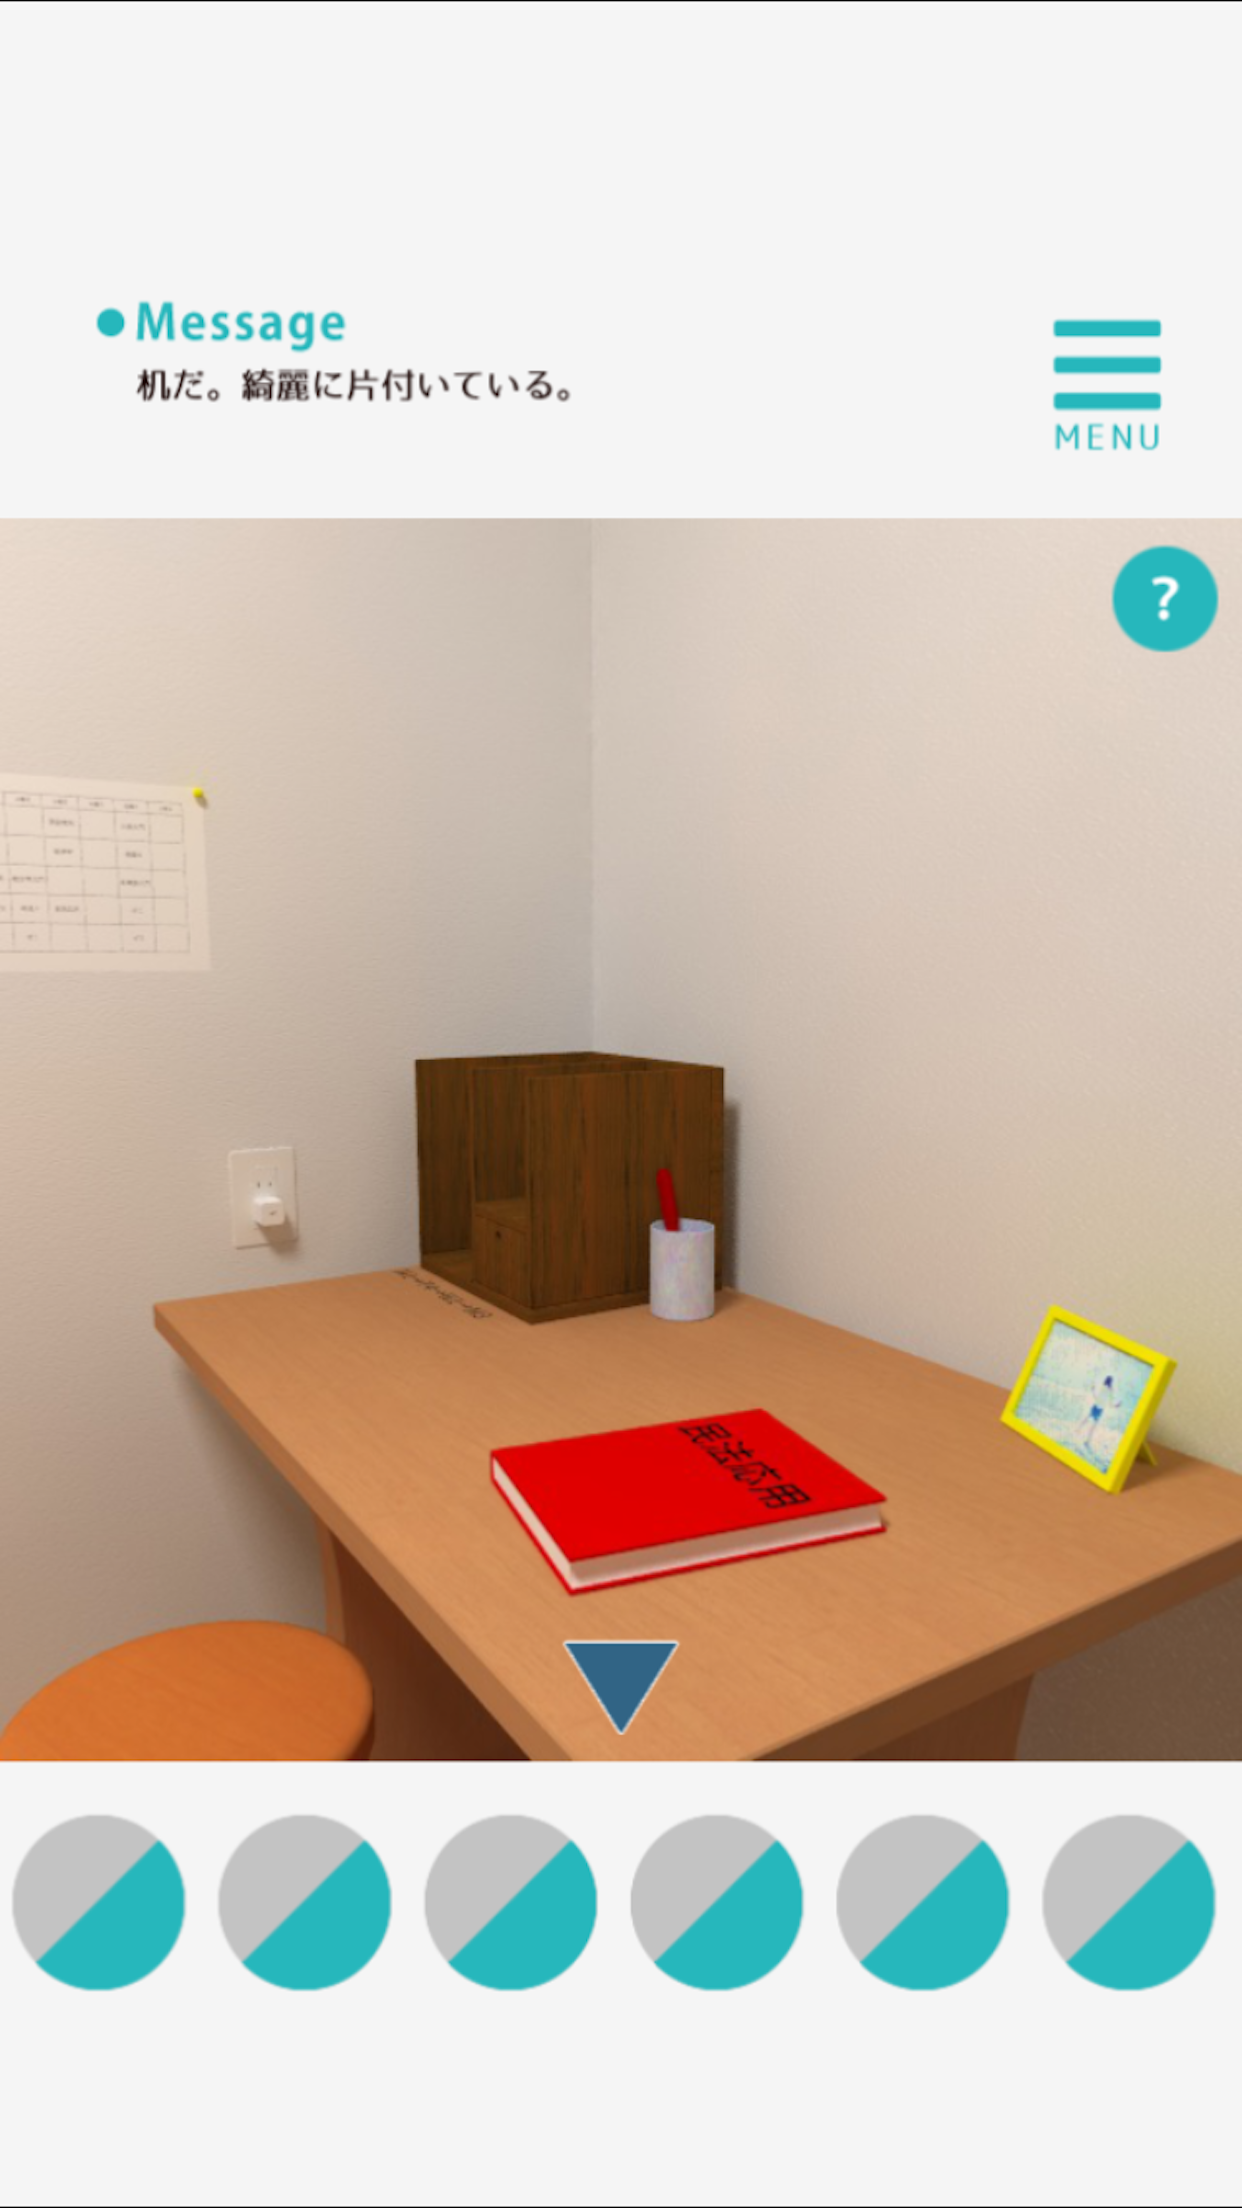 Download One Room VR - Uniform Edition APK 1.2.0 by Gugenka Inc. - Free  Entertainment Android Apps